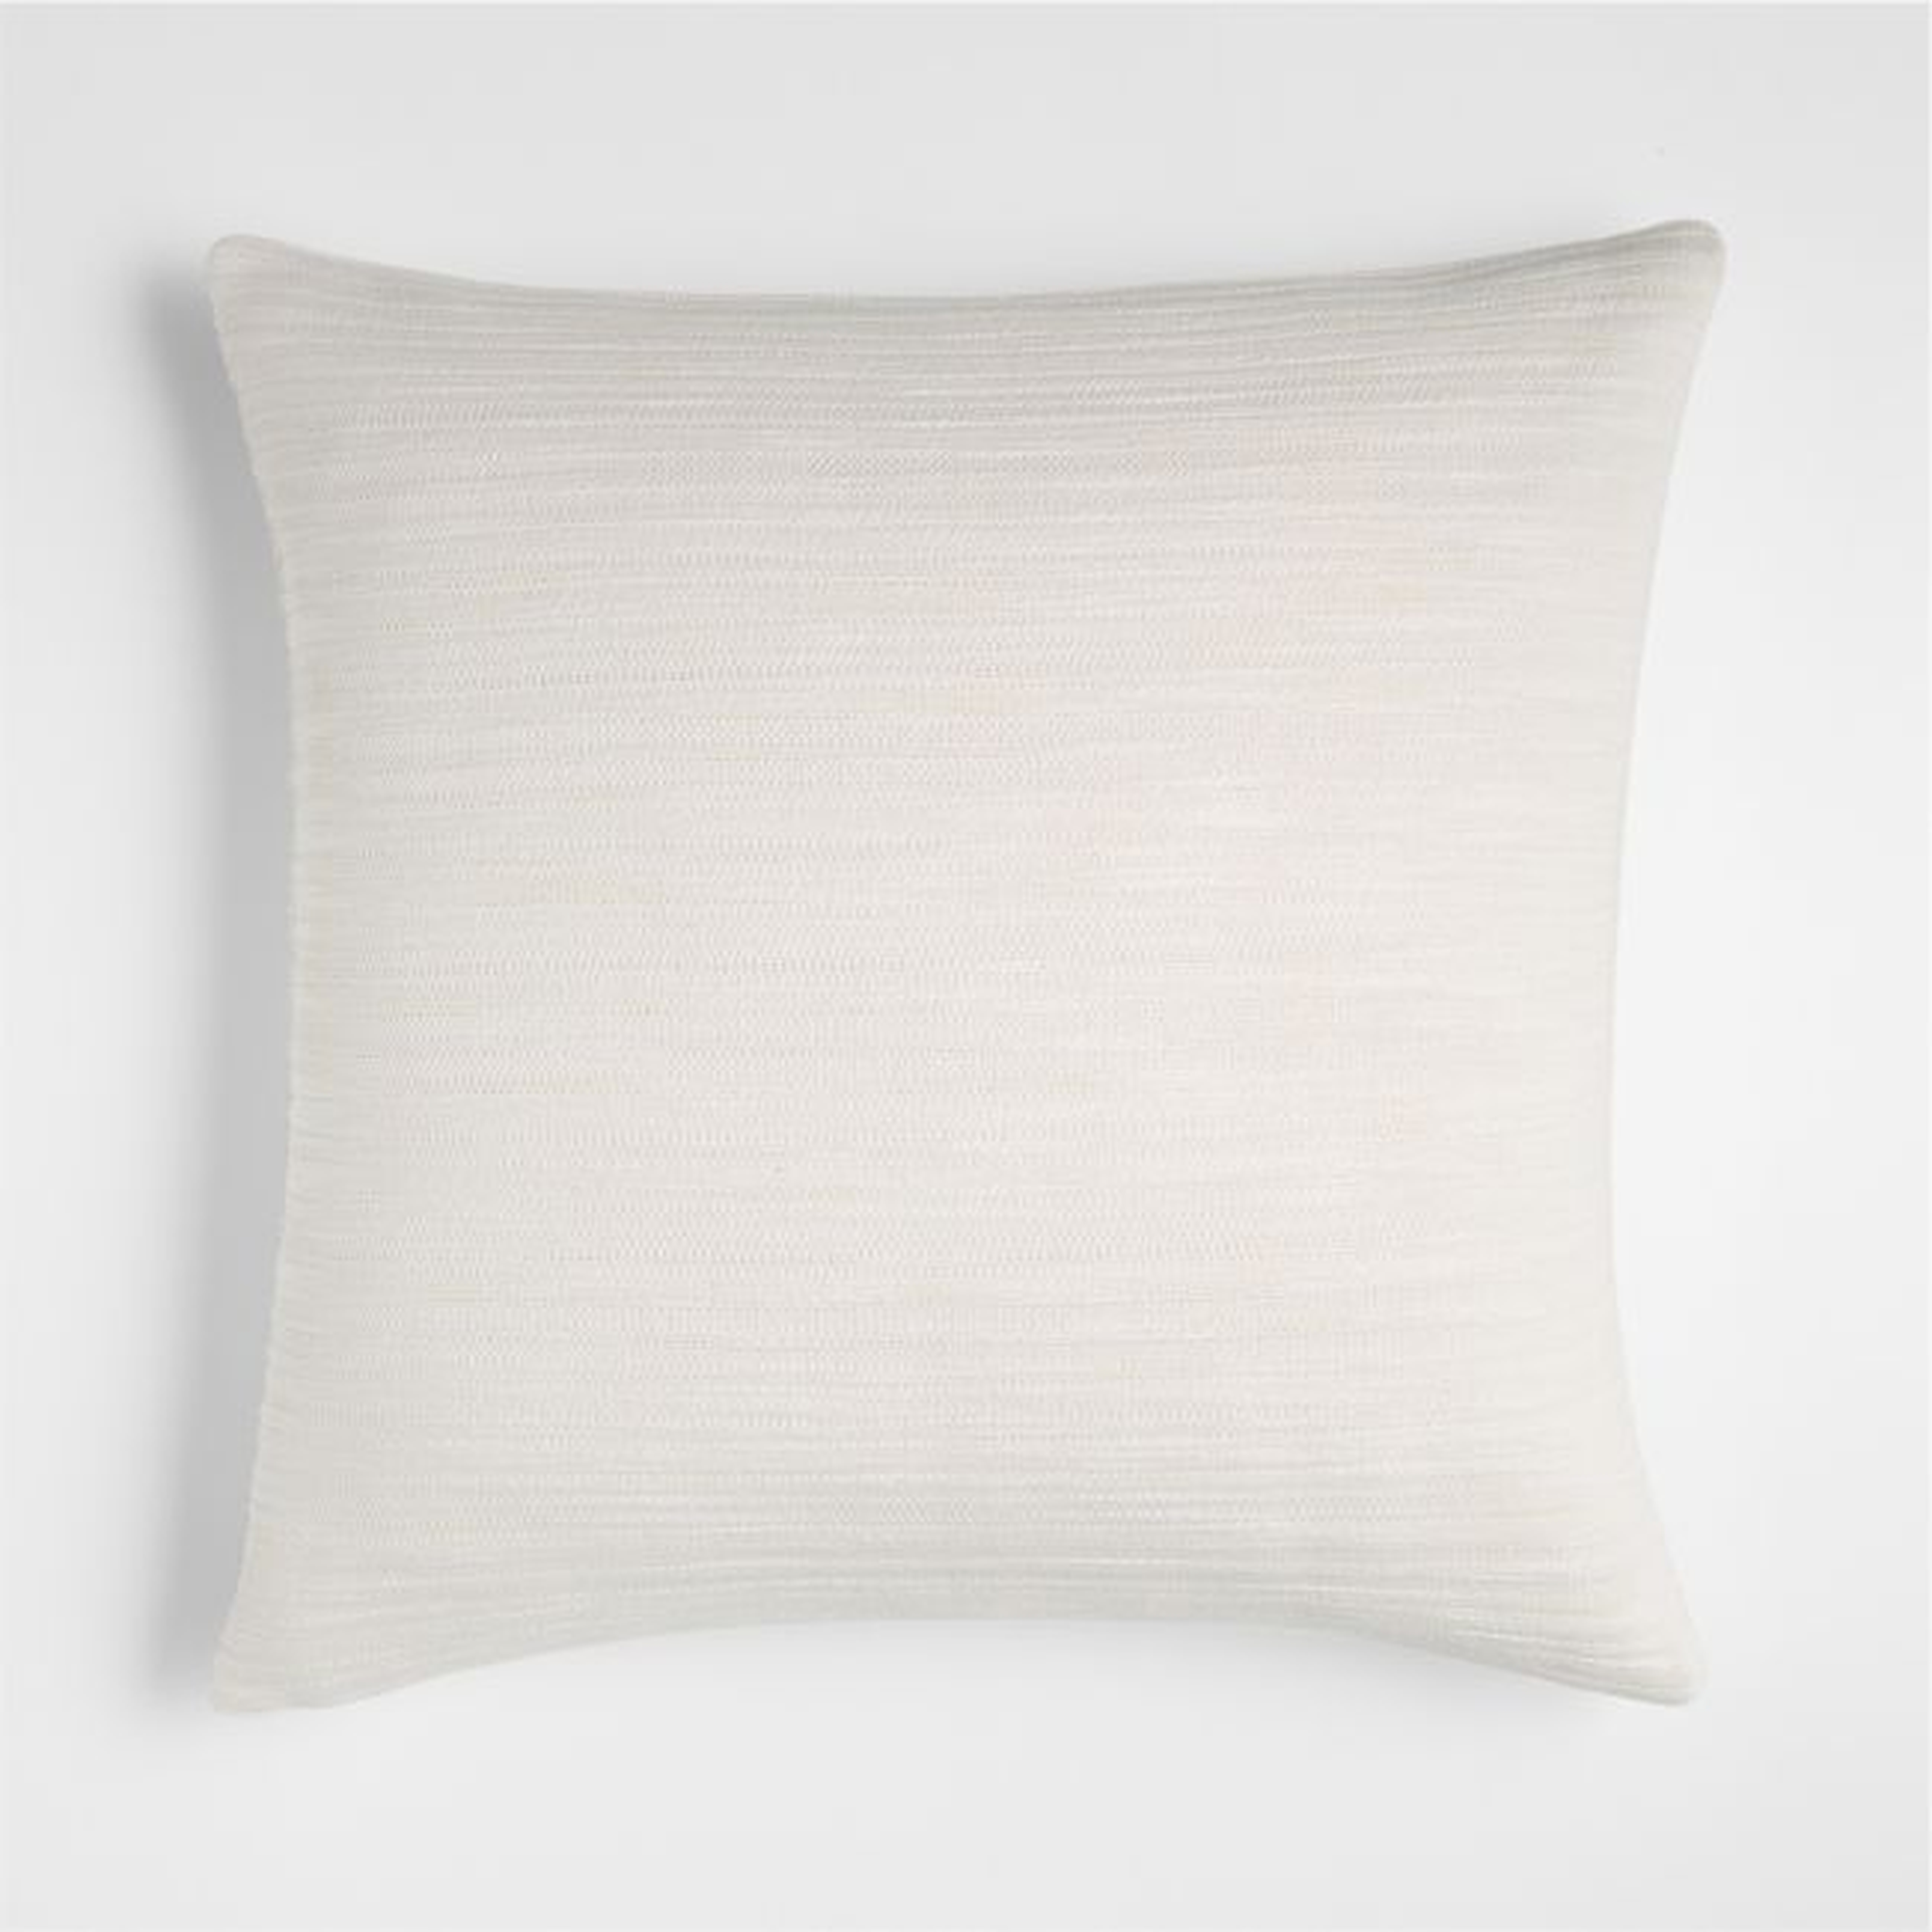 Correto 20" Ivory Textured Pillow Cover with Feather-Down Insert - Crate and Barrel